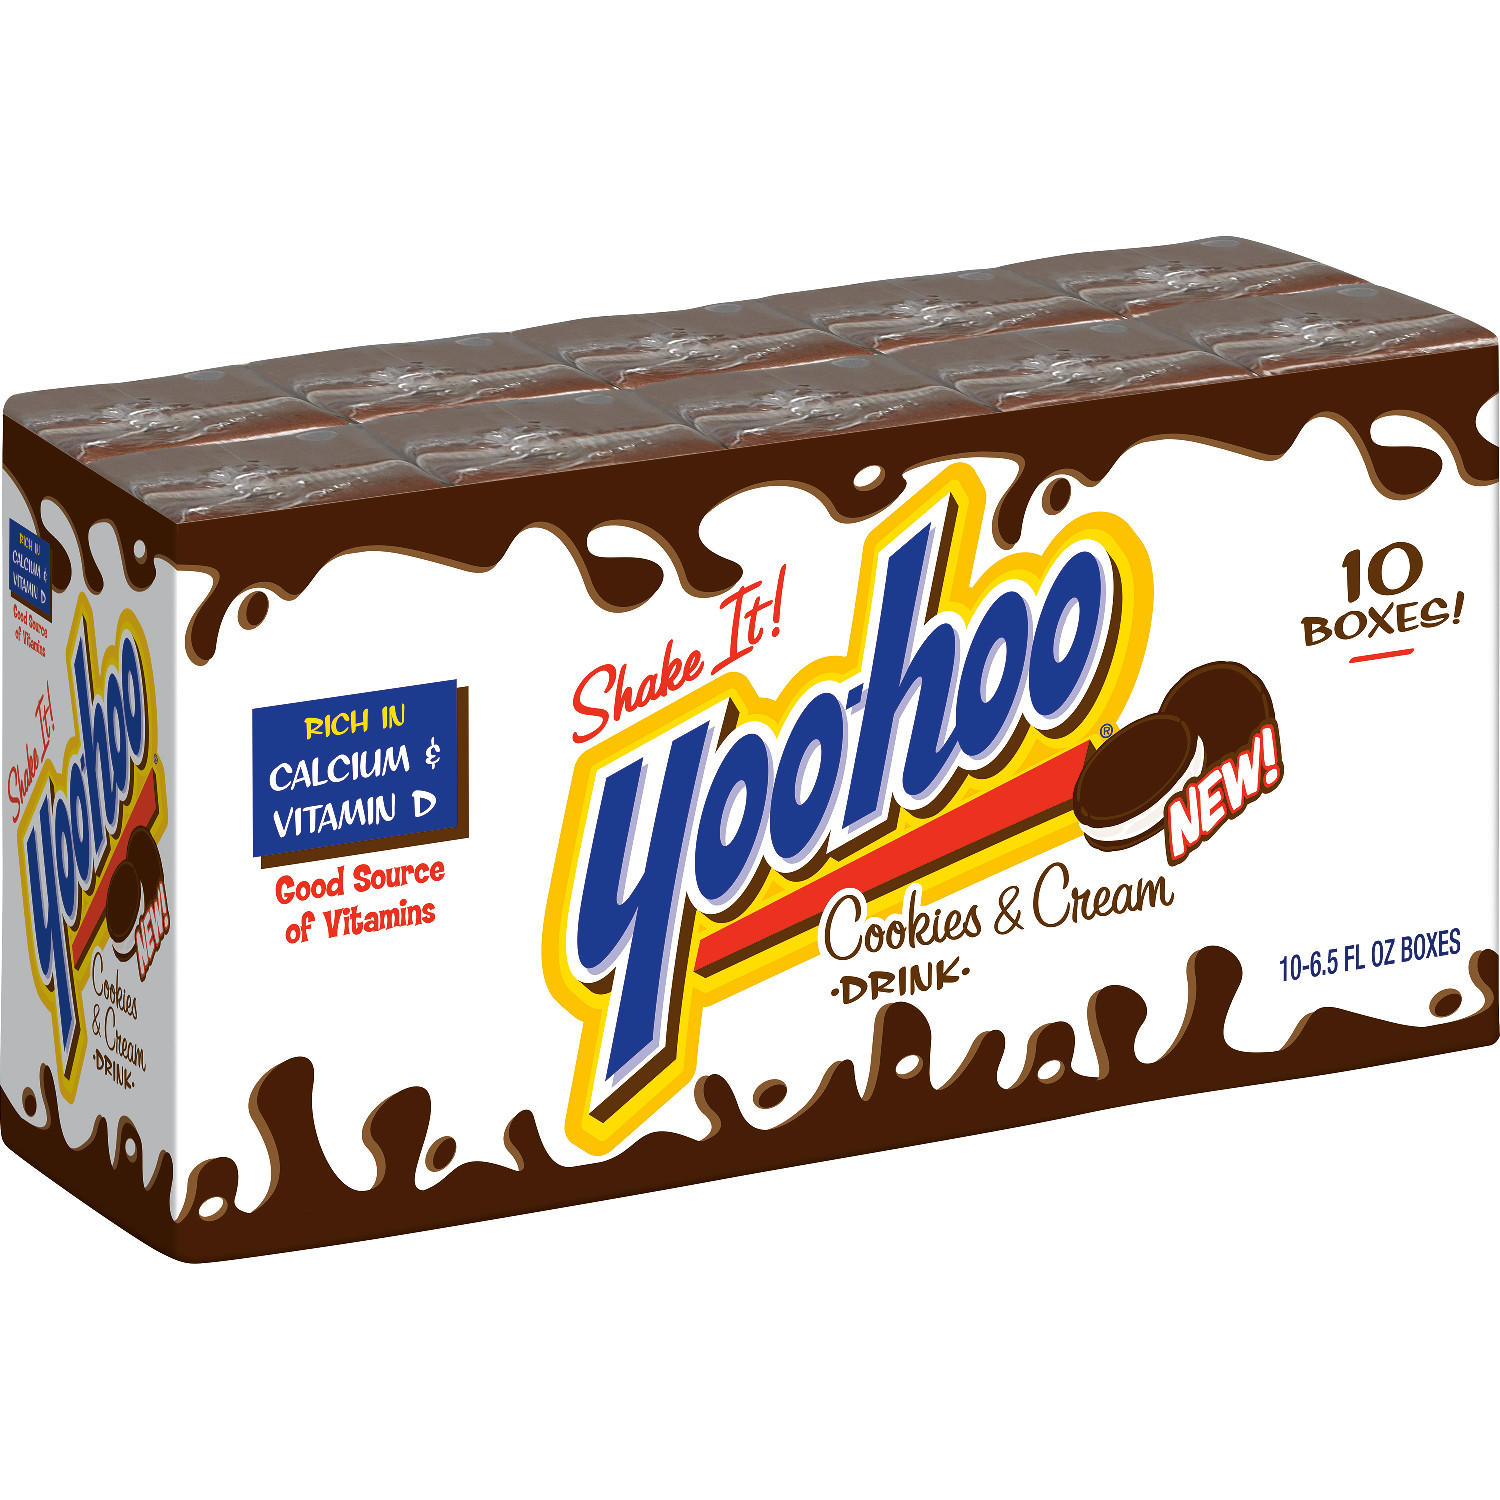 Yoo-hoo Cookies and Cream Drink, 6.5 Fl Oz Boxes, 10 Count (Pack of 4) - image 3 of 10